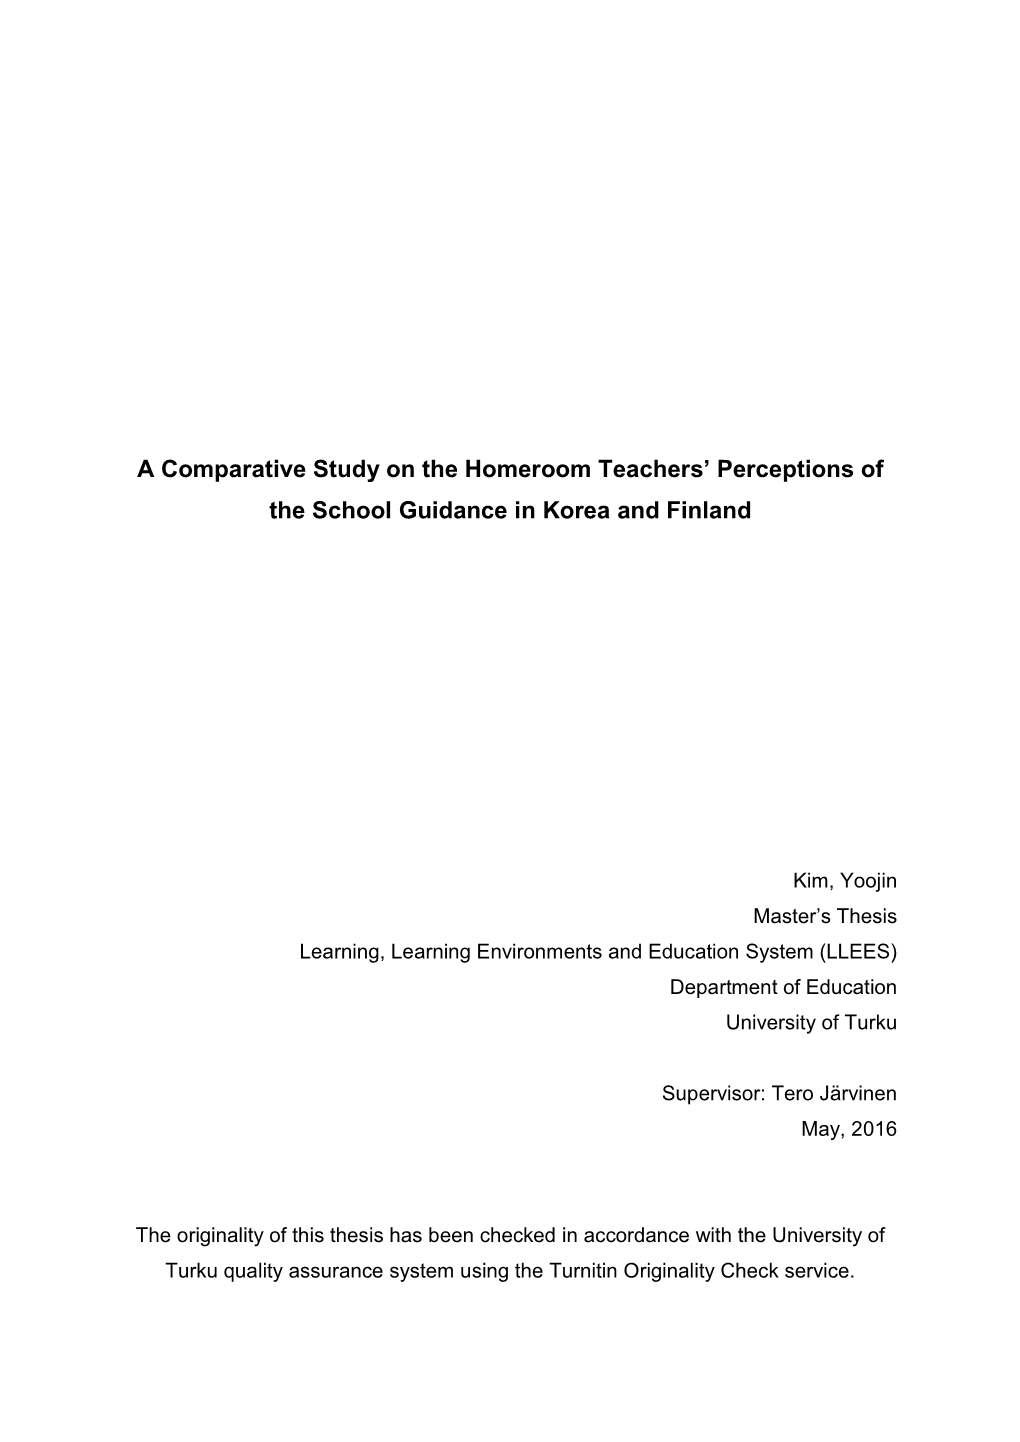 A Comparative Study on the Homeroom Teachers' Perceptions of the School Guidance in Korea and Finland